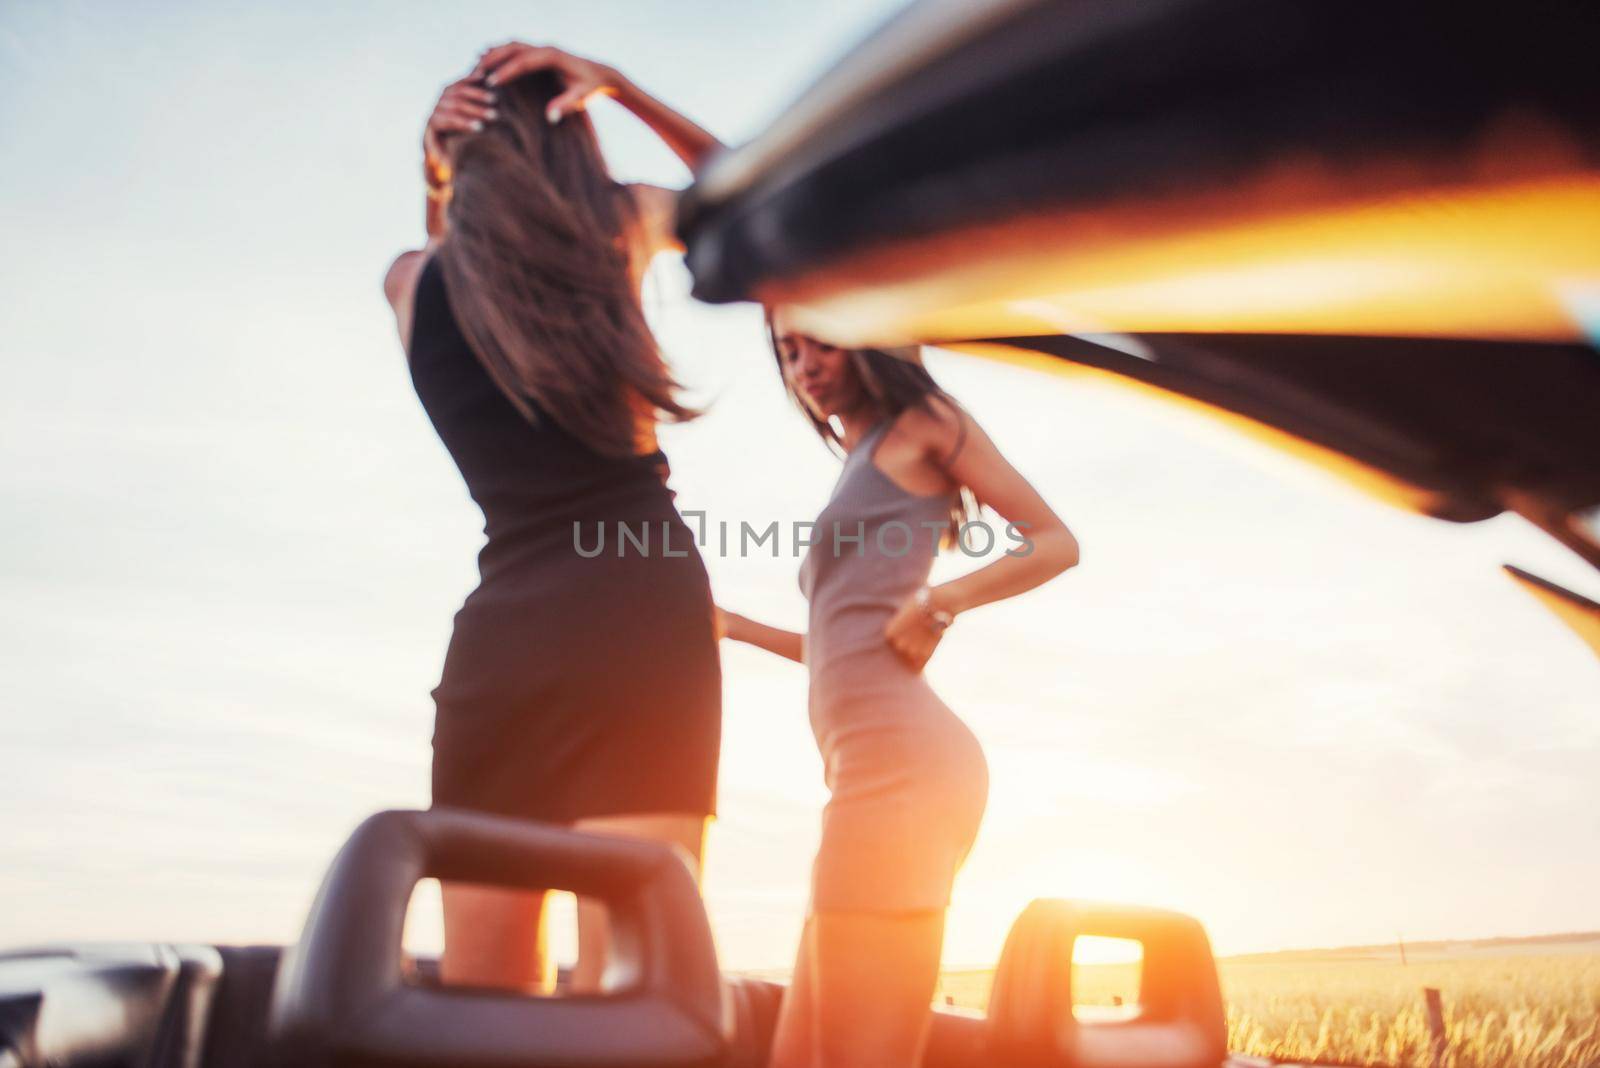 Girls gladly posing next to a black car by Standret